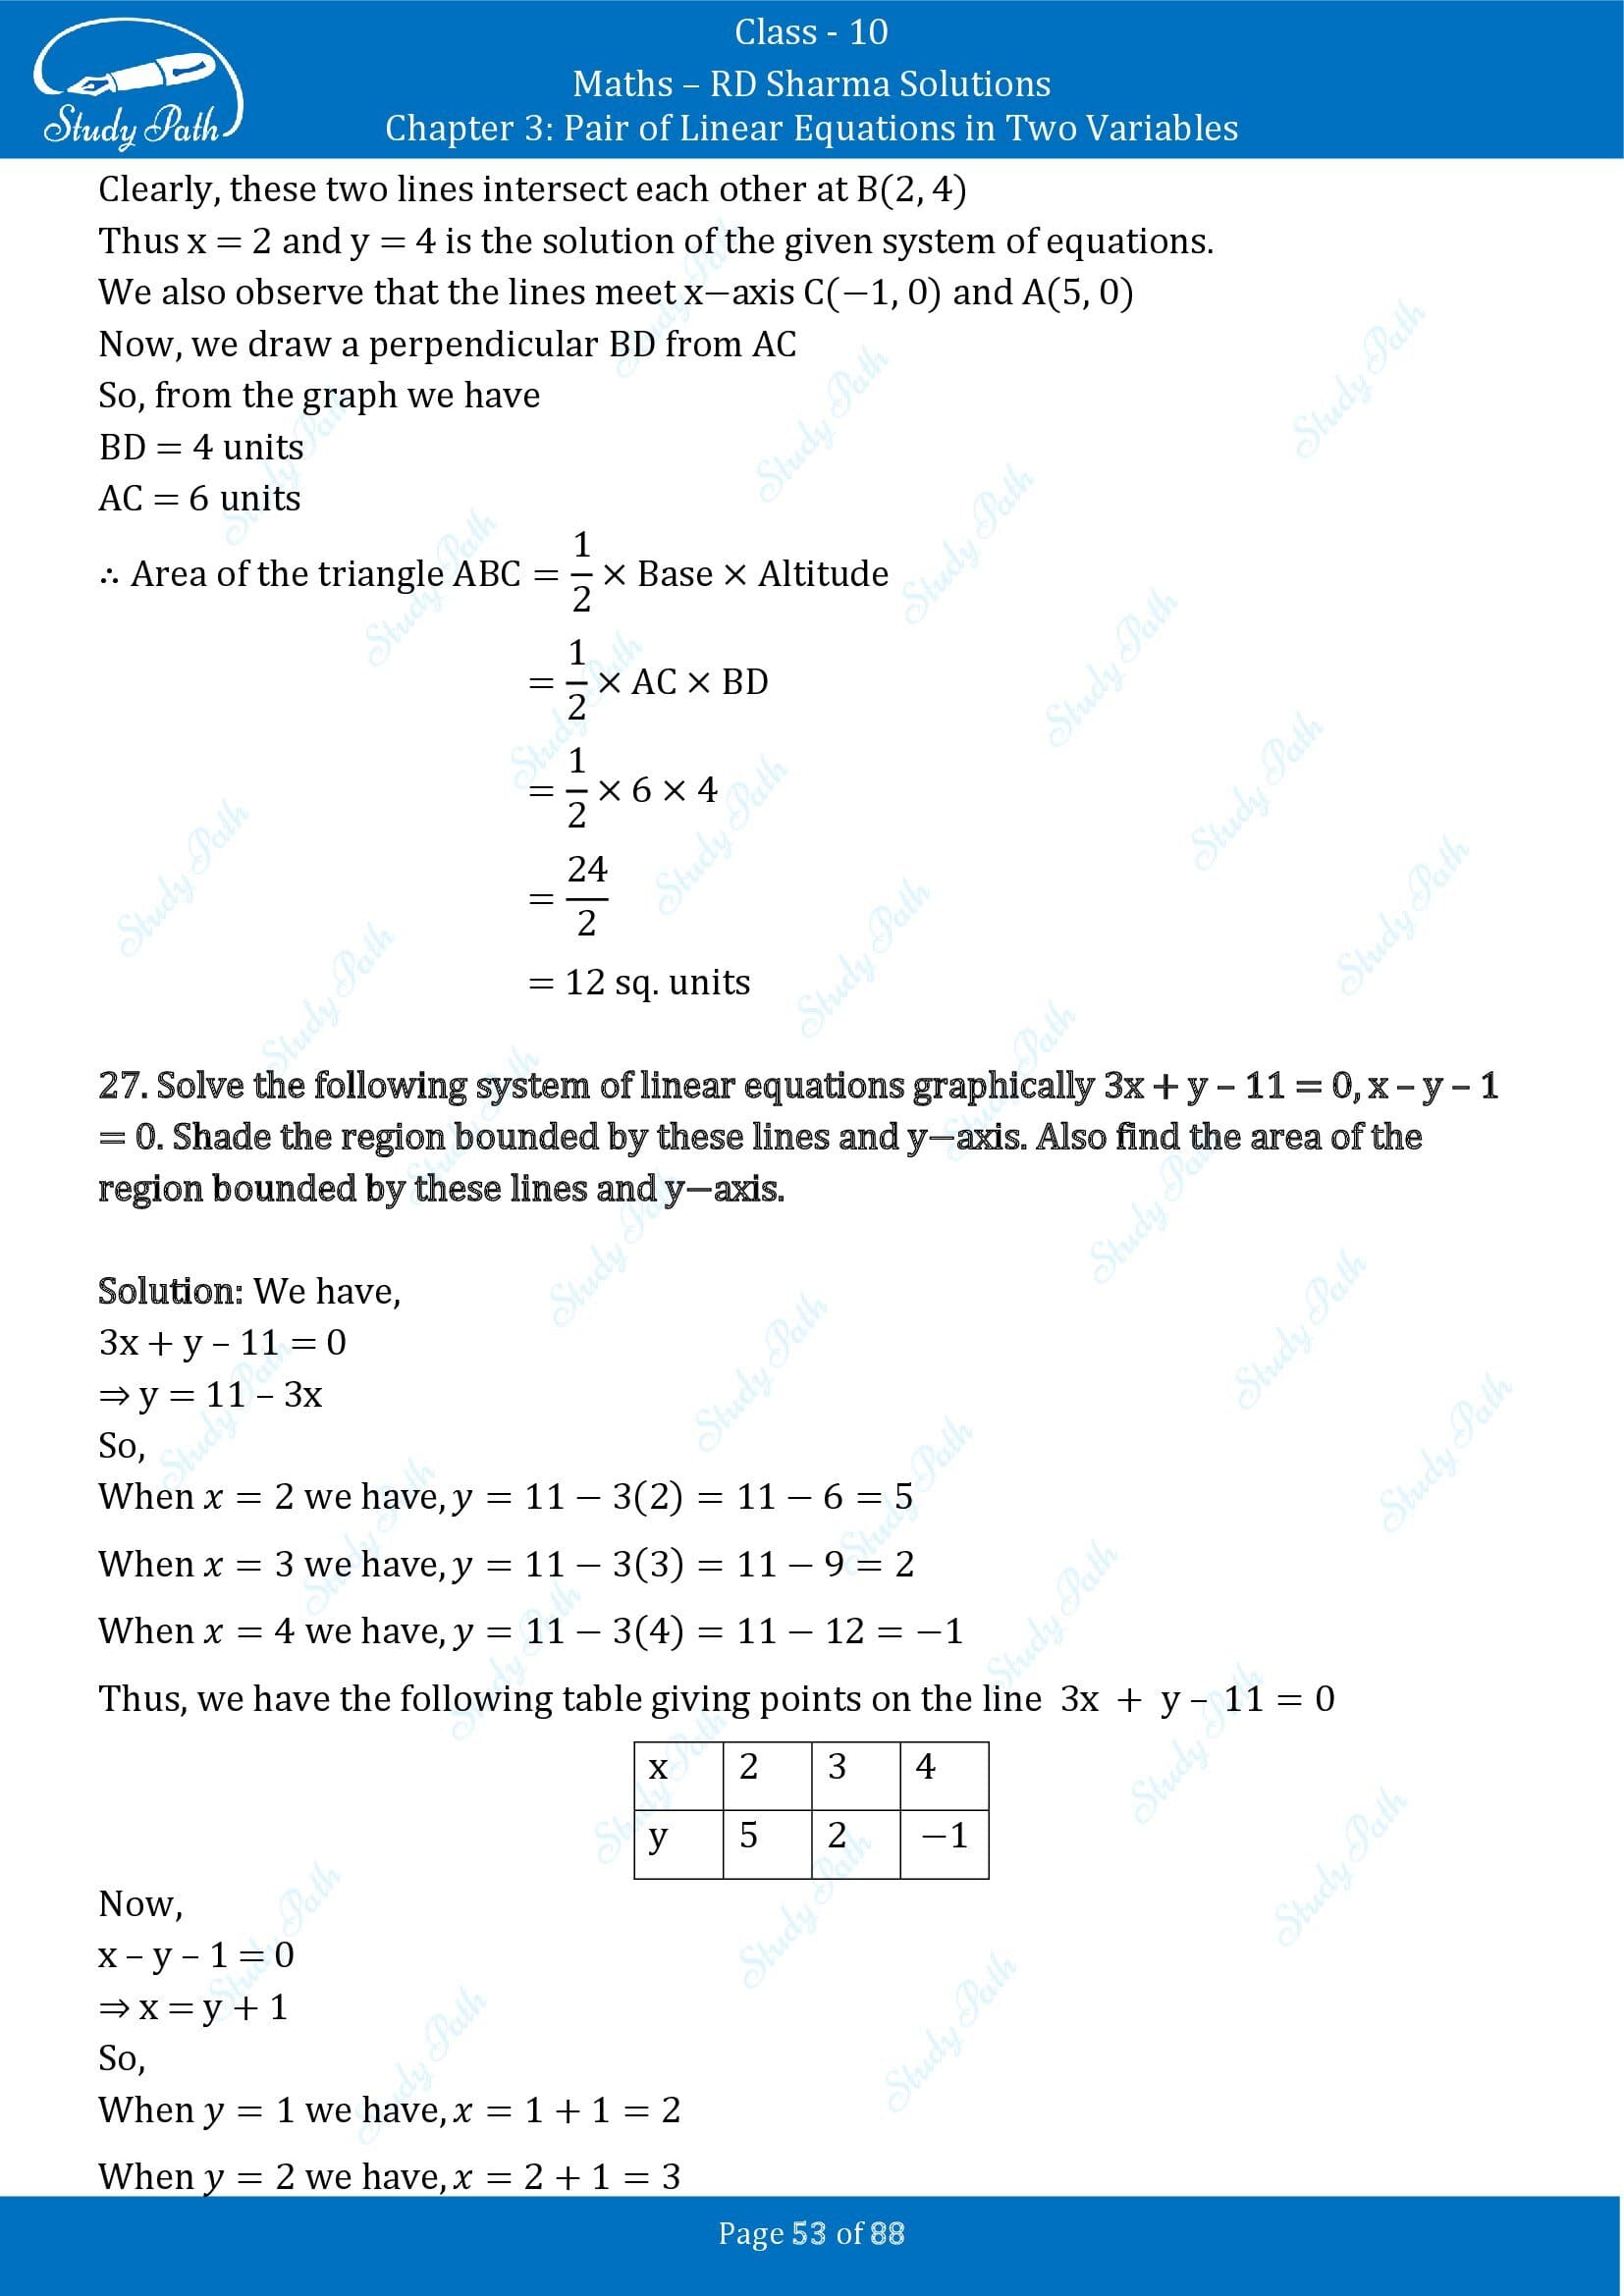 RD Sharma Solutions Class 10 Chapter 3 Pair of Linear Equations in Two Variables Exercise 3.2 00053